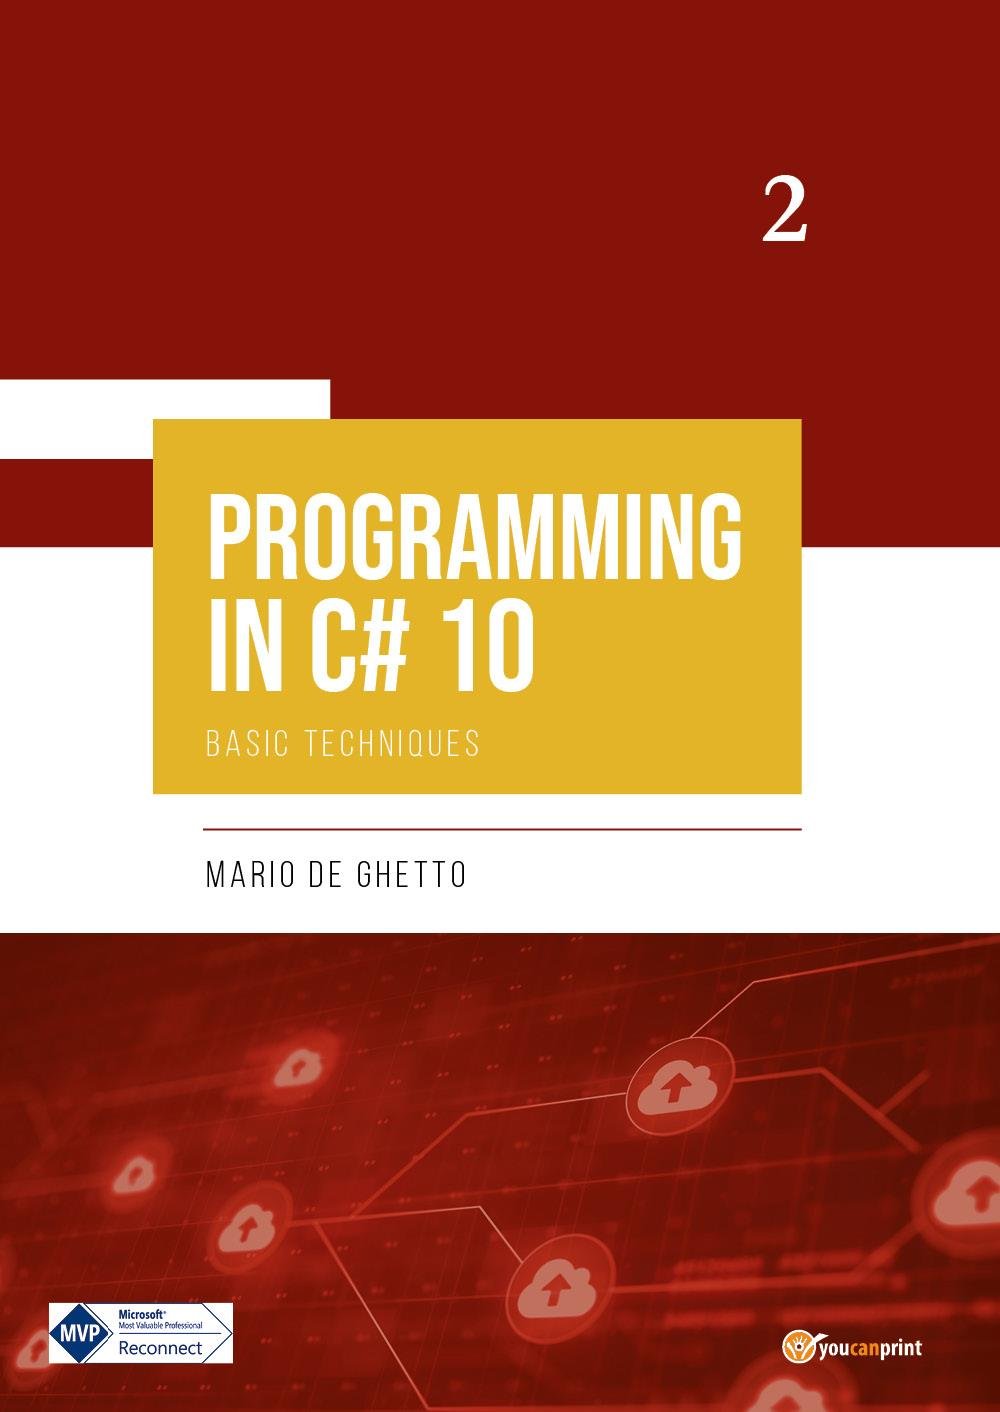 PROGRAMMING IN C# 10 - Basic Techniques